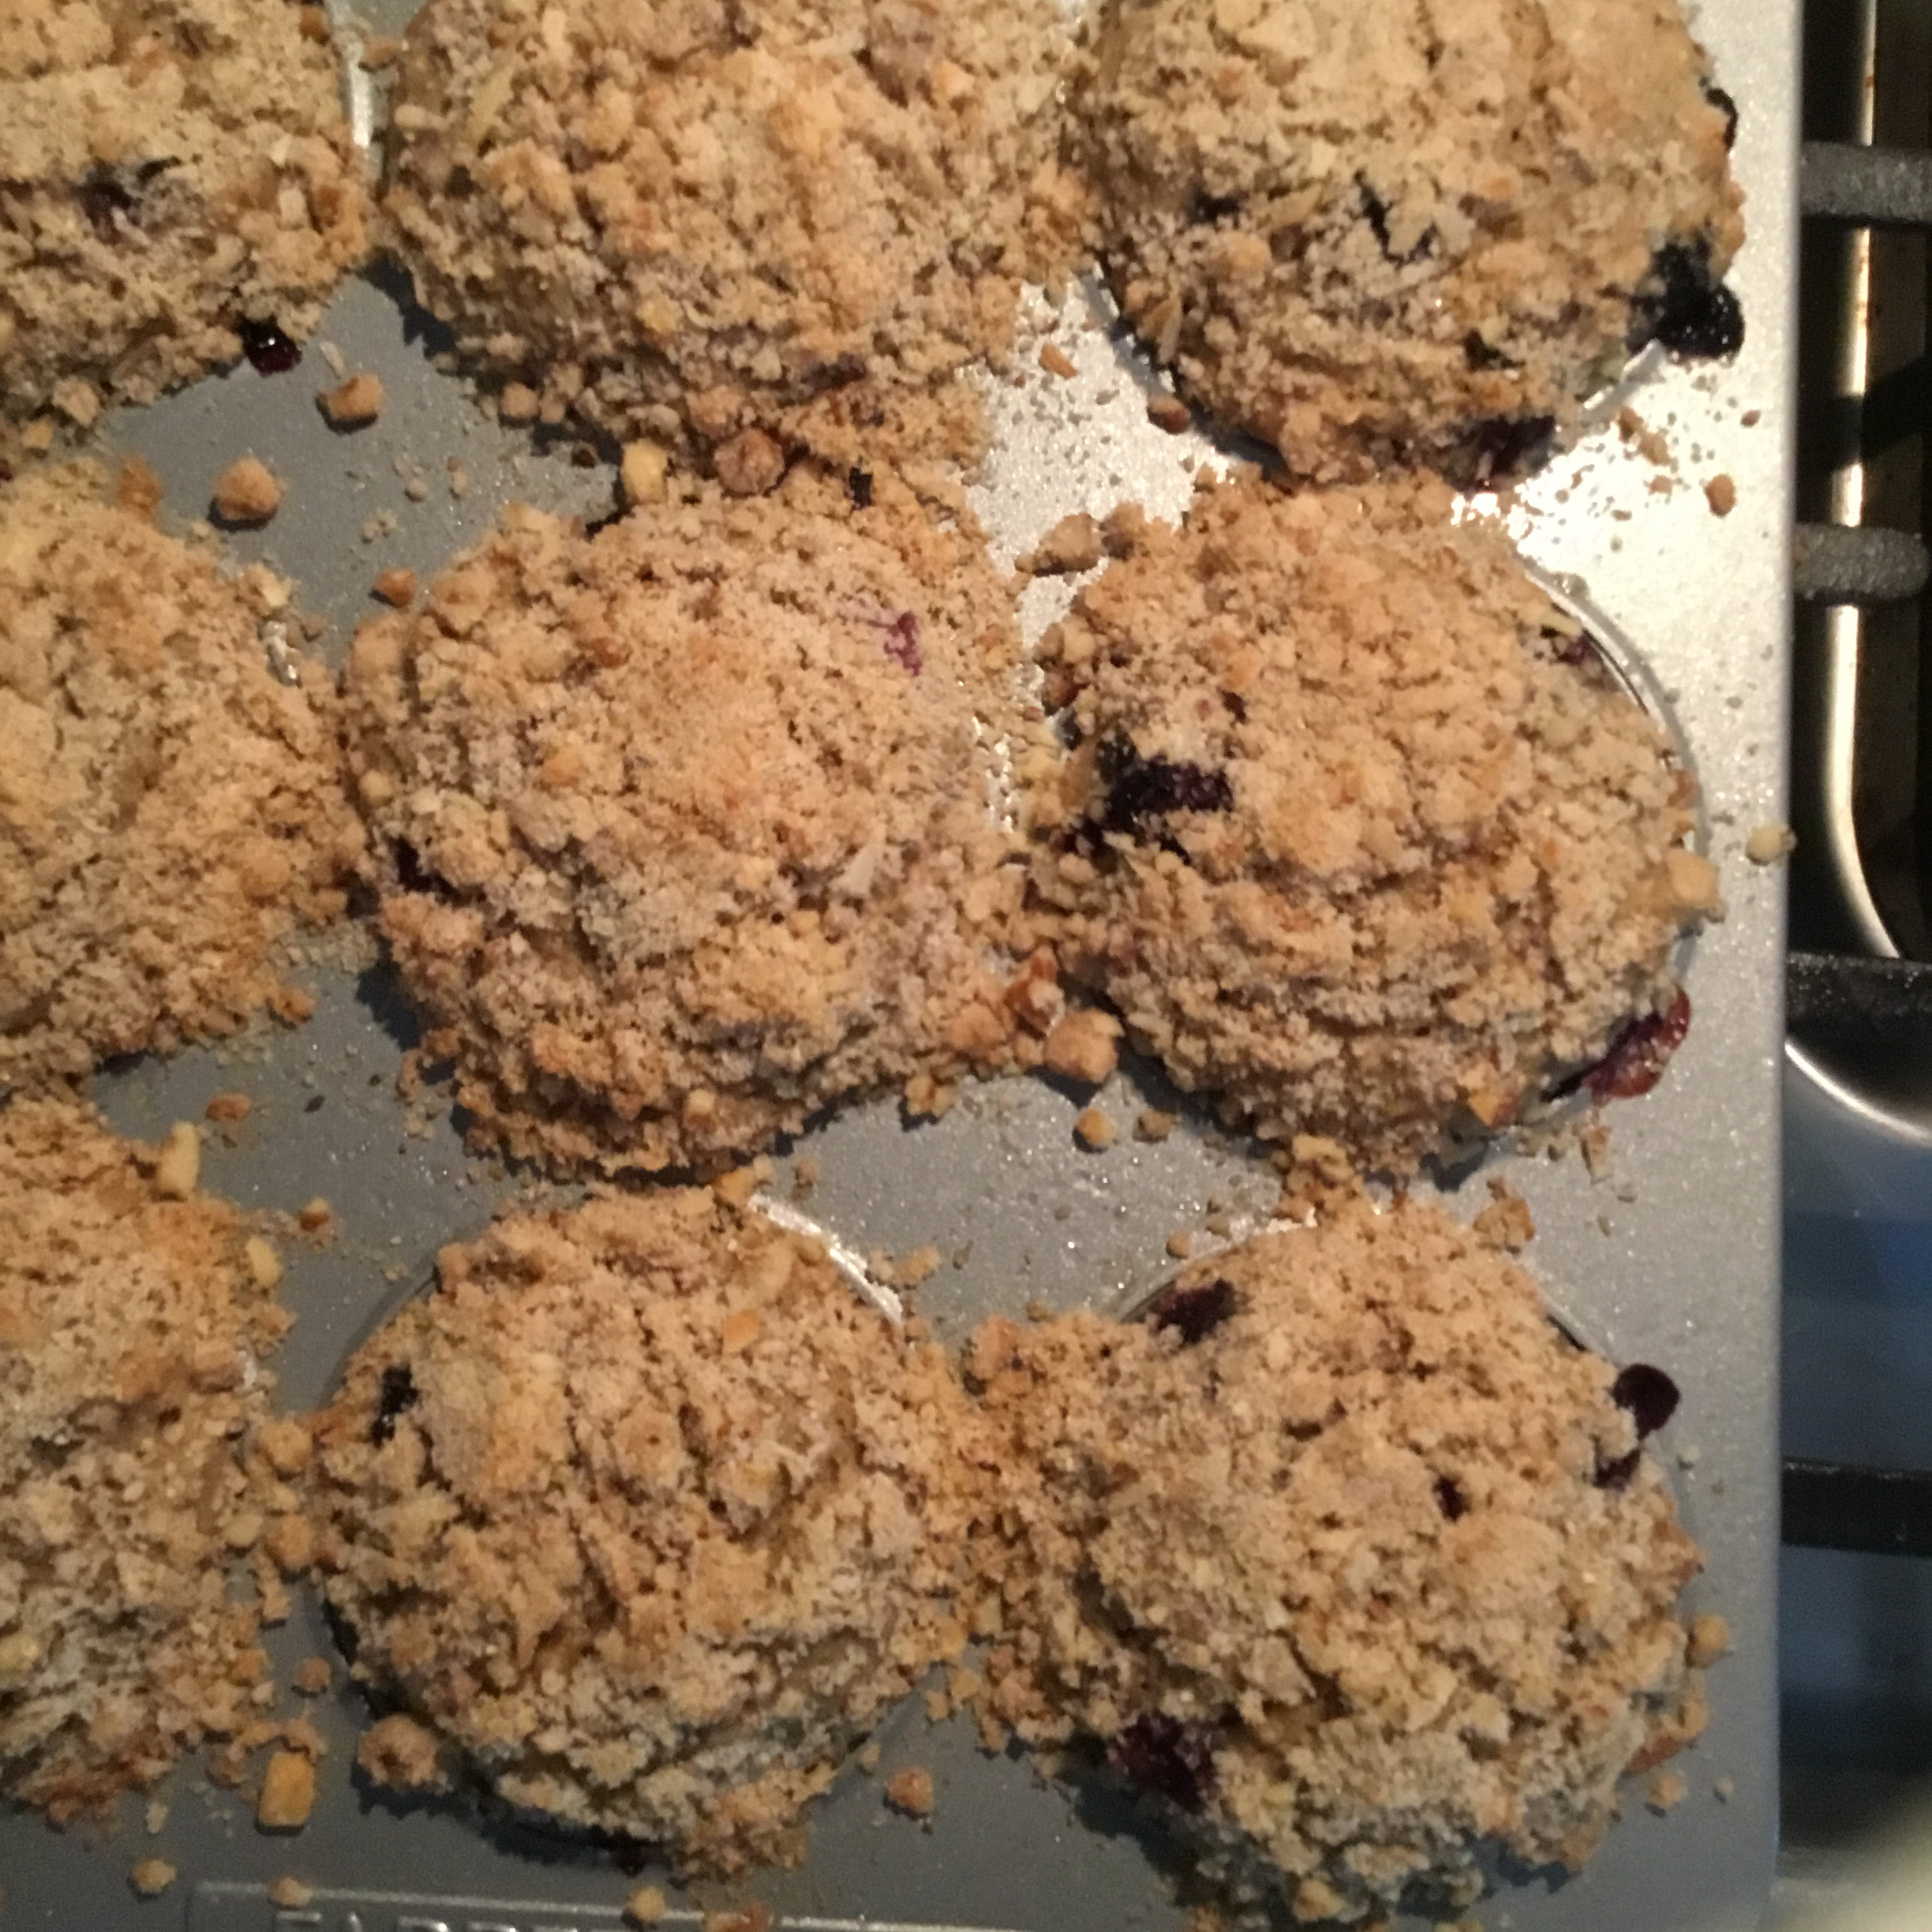 Blueberry Banana Coconut Flax Muffins 